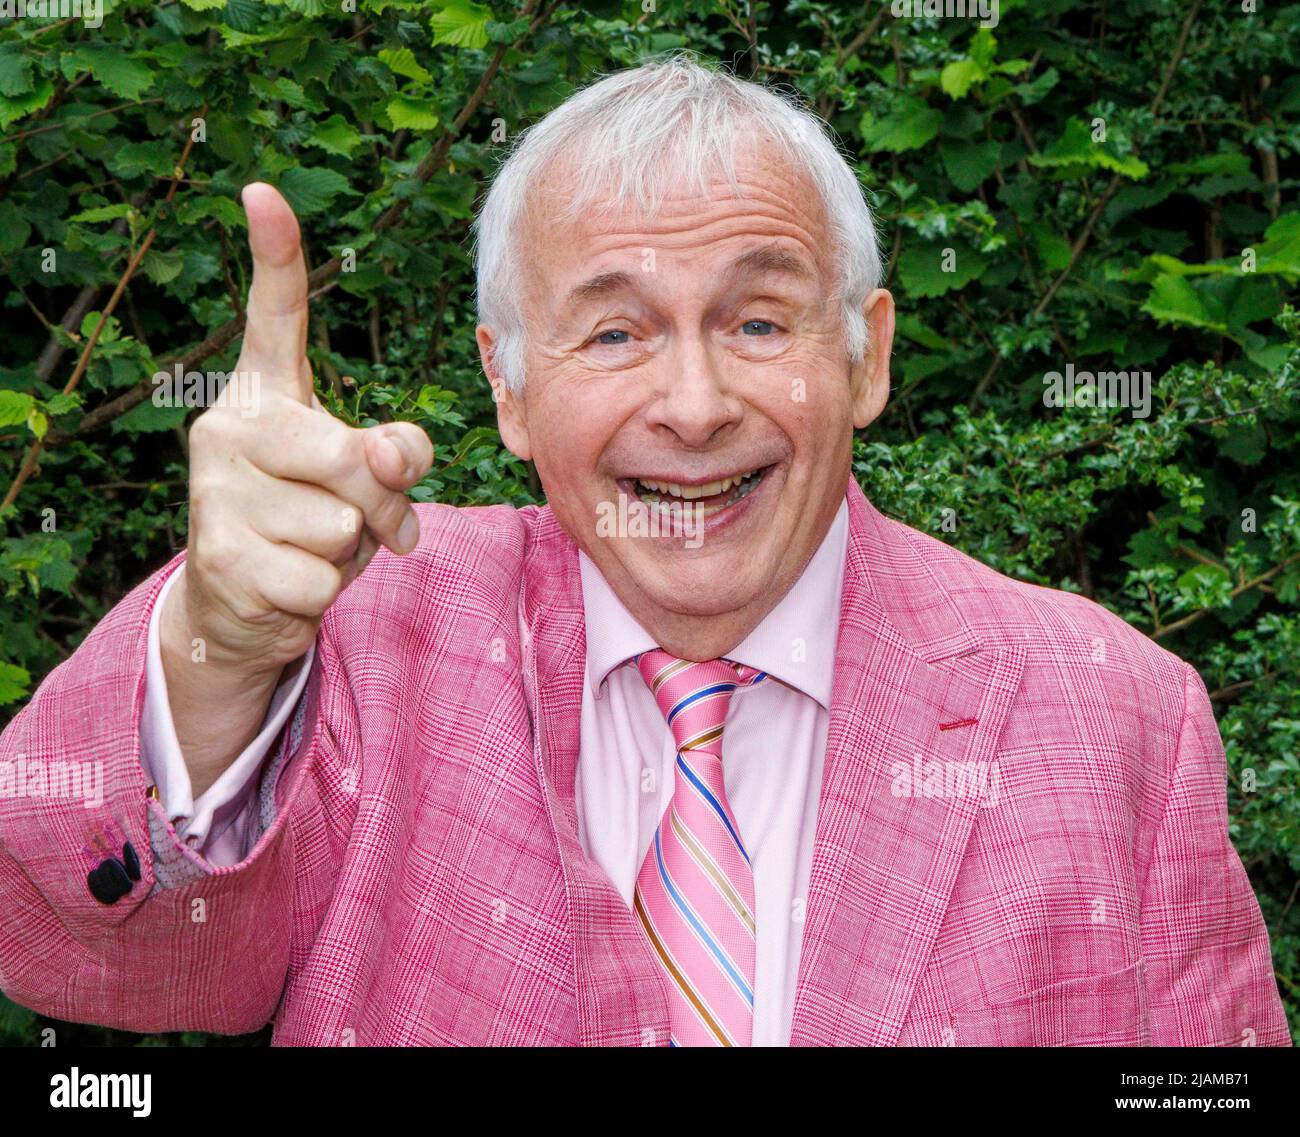 Actor and television presenter, Christopher Biggins at the RHS Chelsea Flower Show. Stock Photo